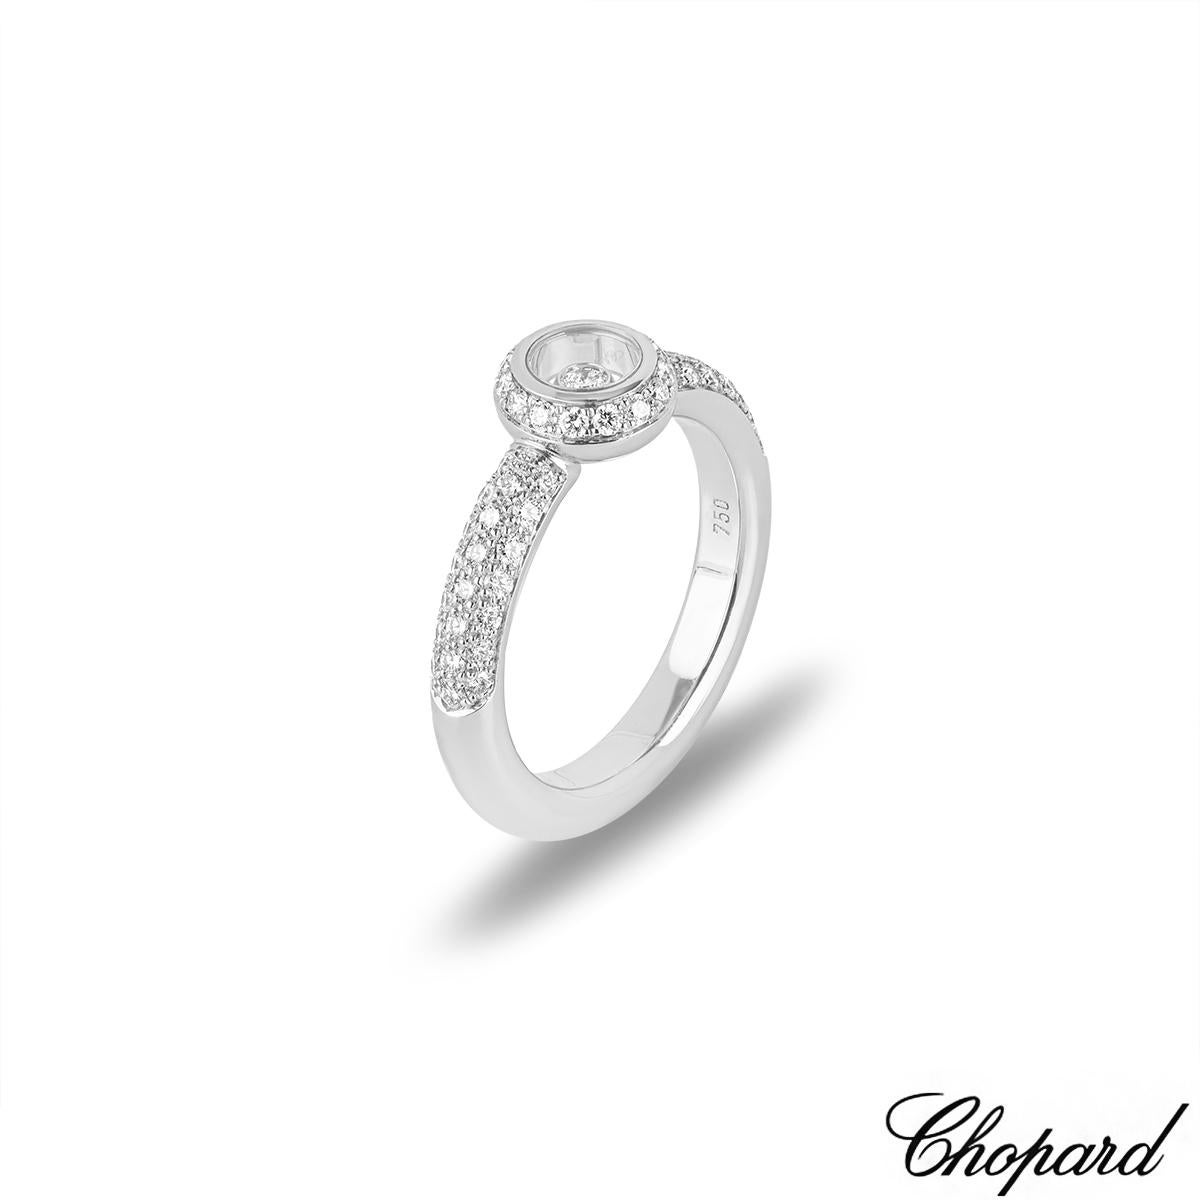 A sparkly 18k white gold Happy Diamonds ring by Chopard. The ring features a circular motif set to the centre with a halo of 15 round brilliant cut diamonds with an approximate weight of 0.13ct. In the centre of the circular motif is a single round